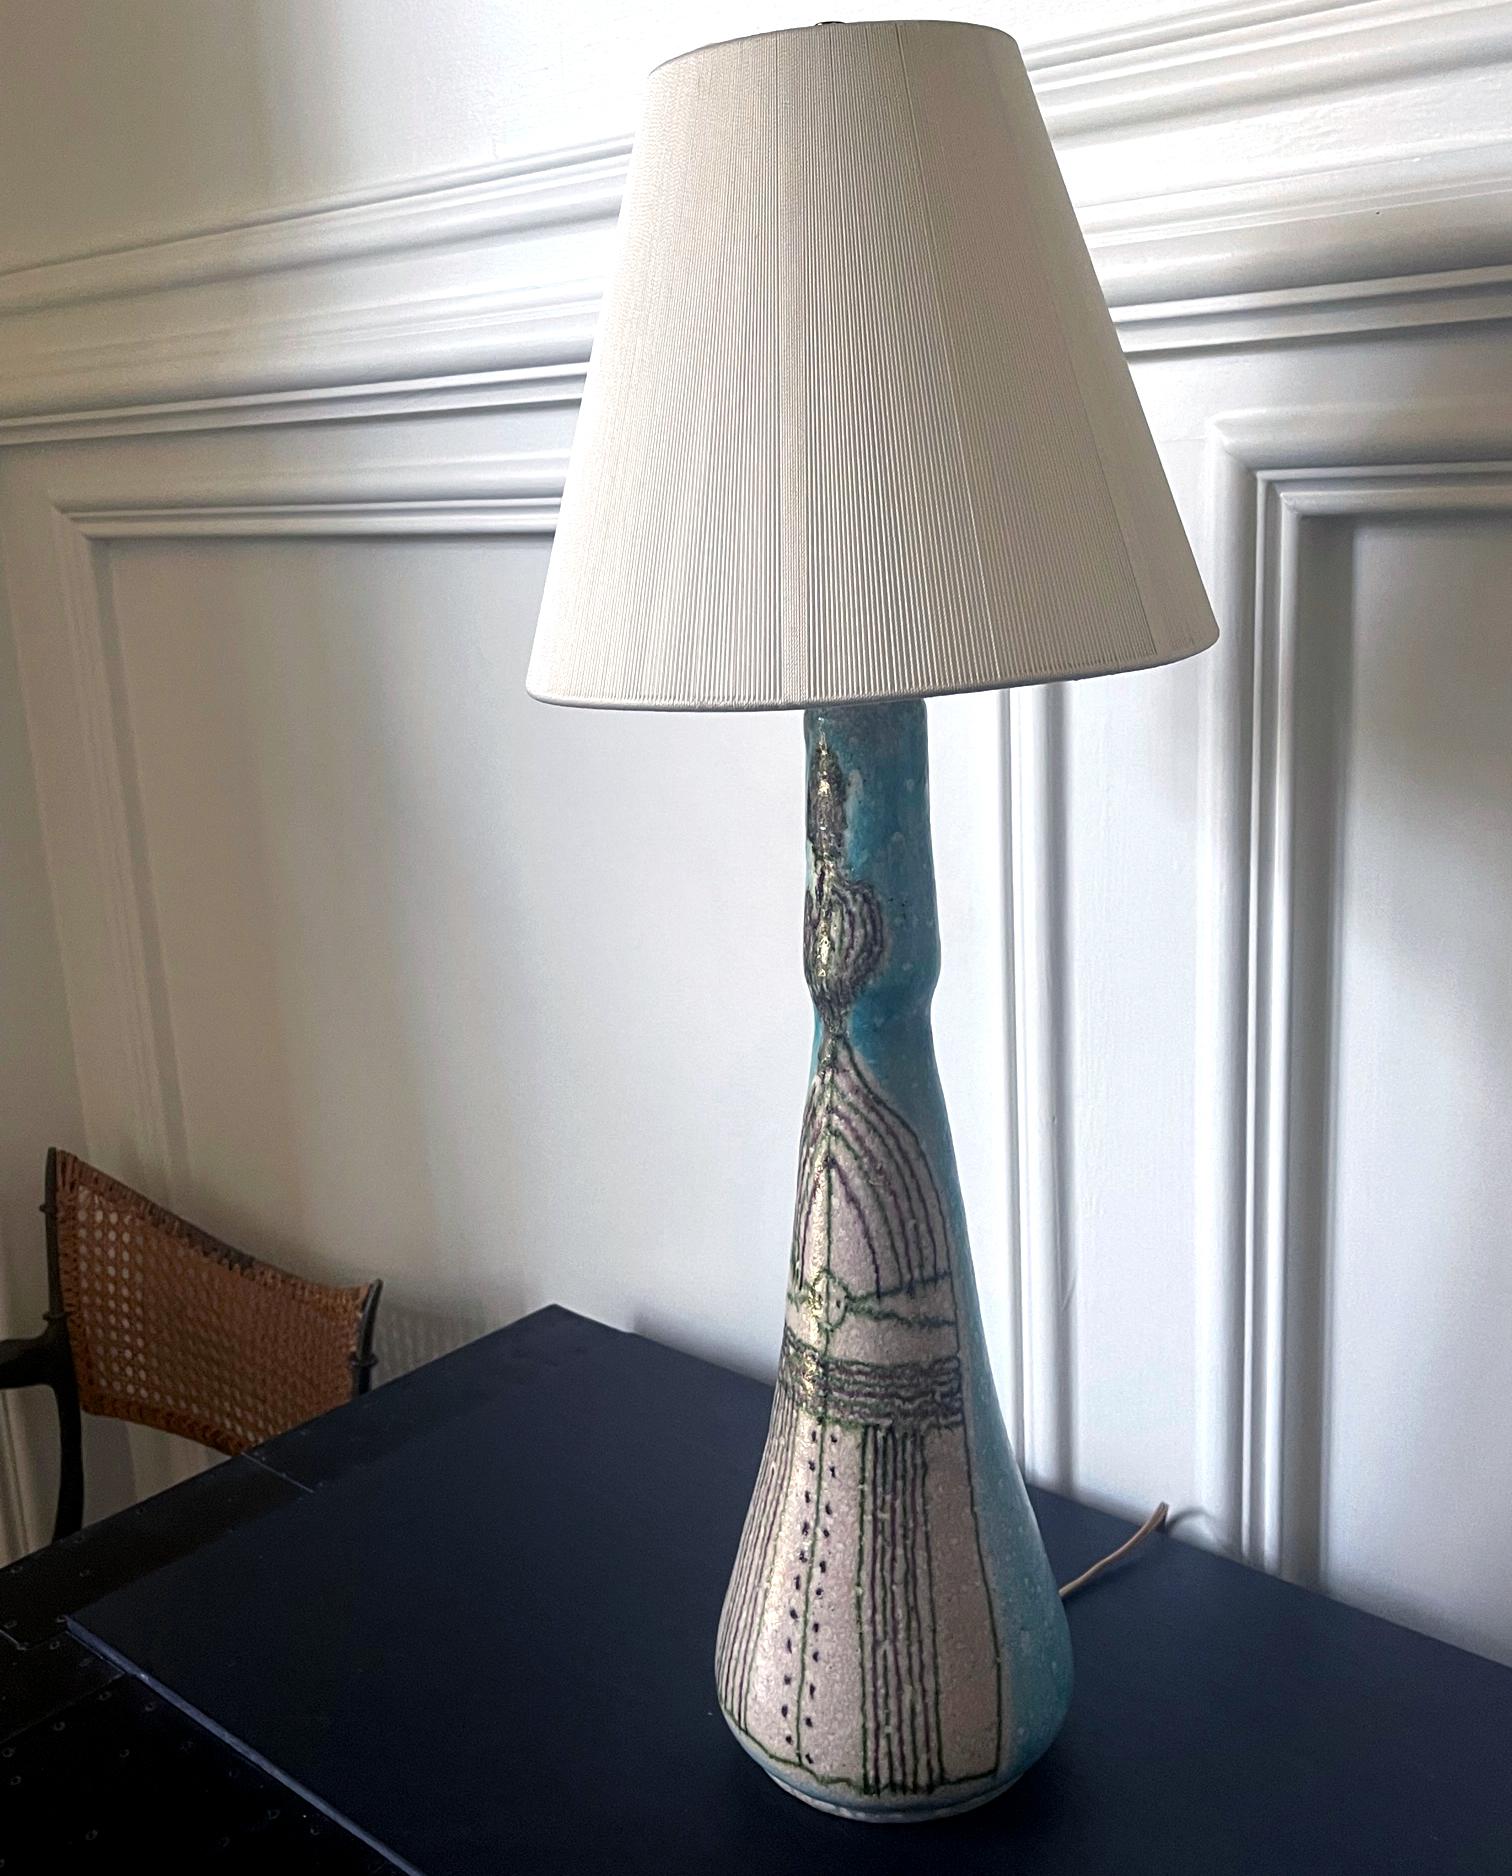 A tall Italian ceramic table lamp designed and made by Guido Gambone (1909-1969), an Italian ceramic artist based in Florence, circa 1950s. The stoneware lamp base is covered with the artist's signature 